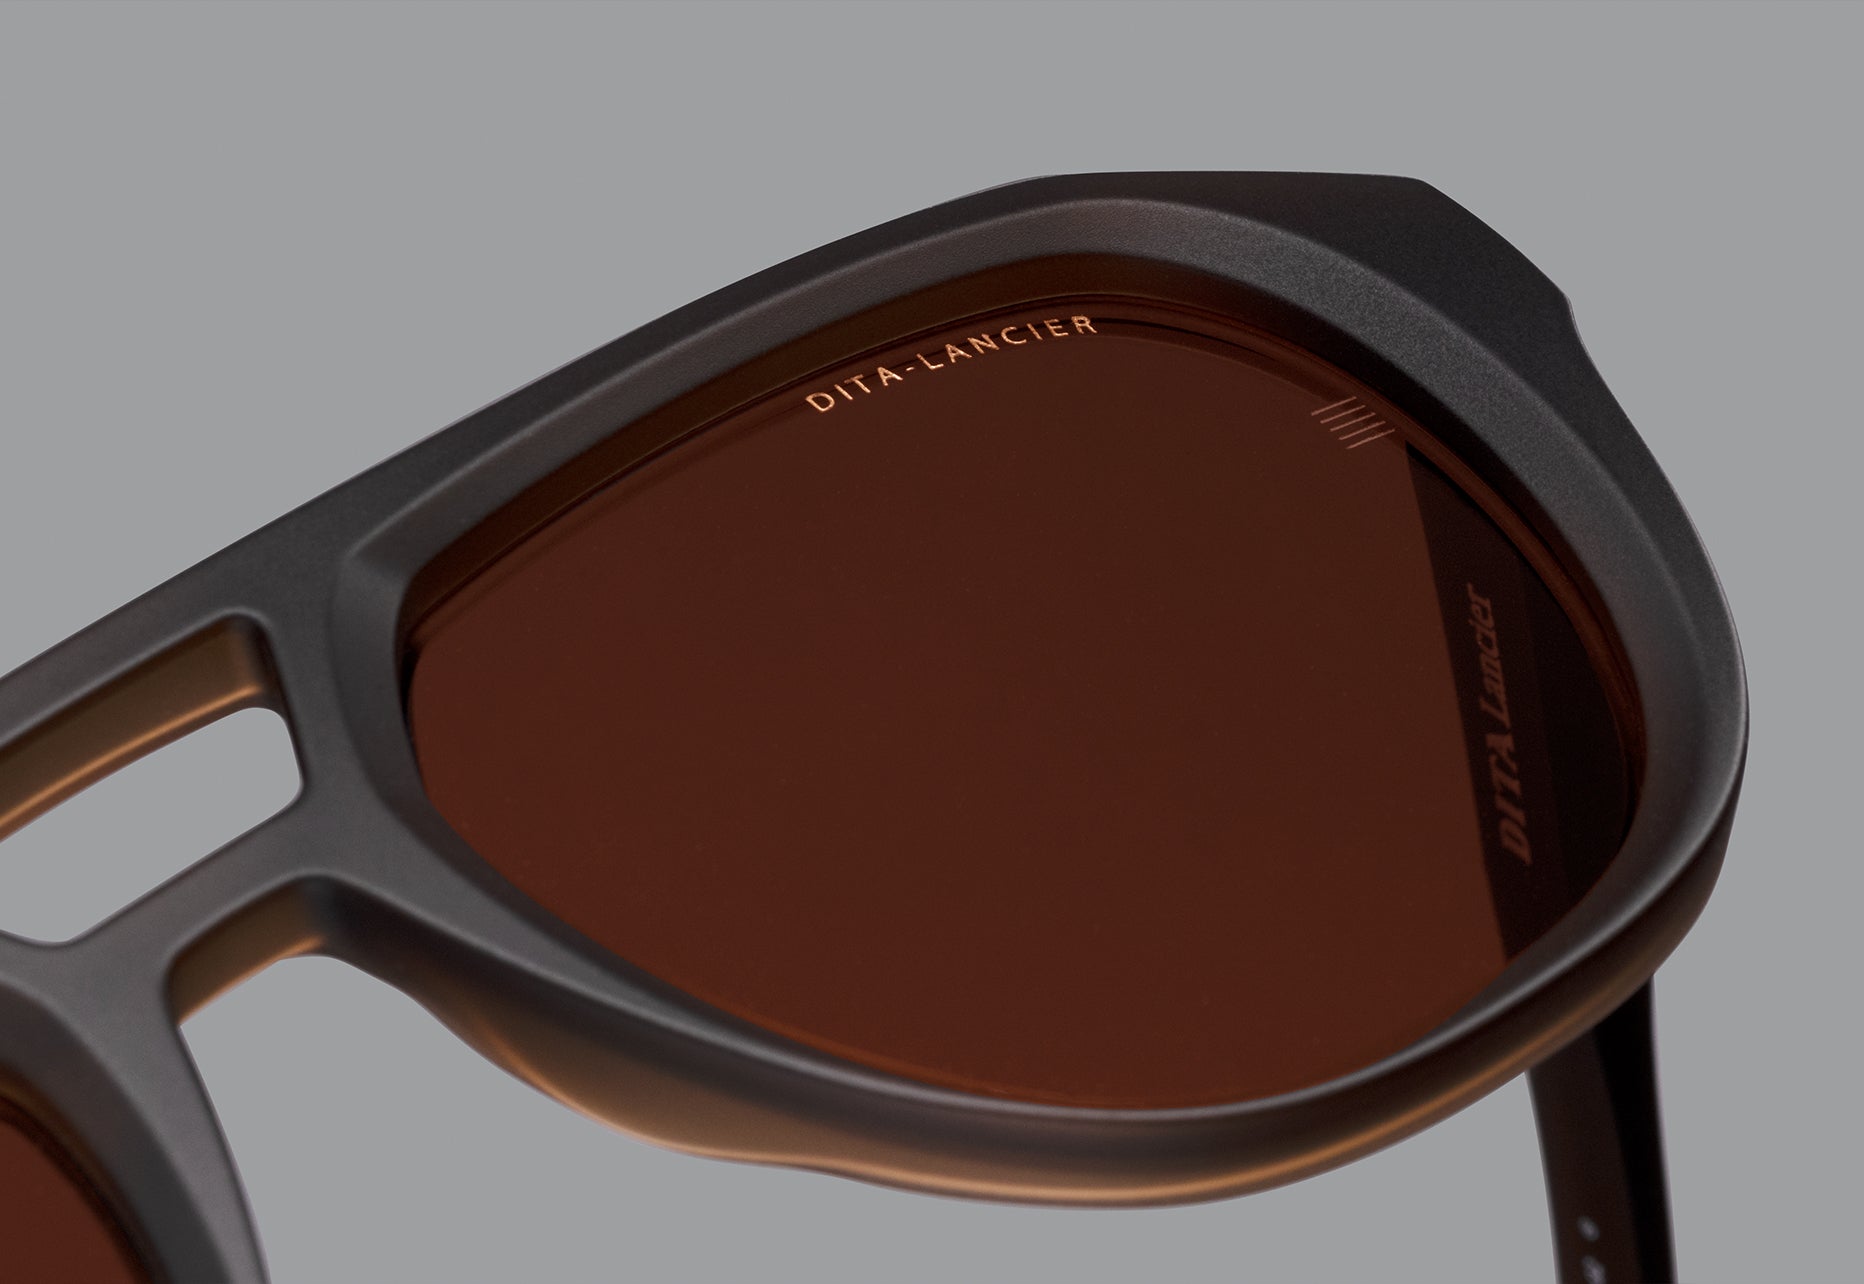 DITA-Lancier frame with land lens featuring durable and light TR90 Material